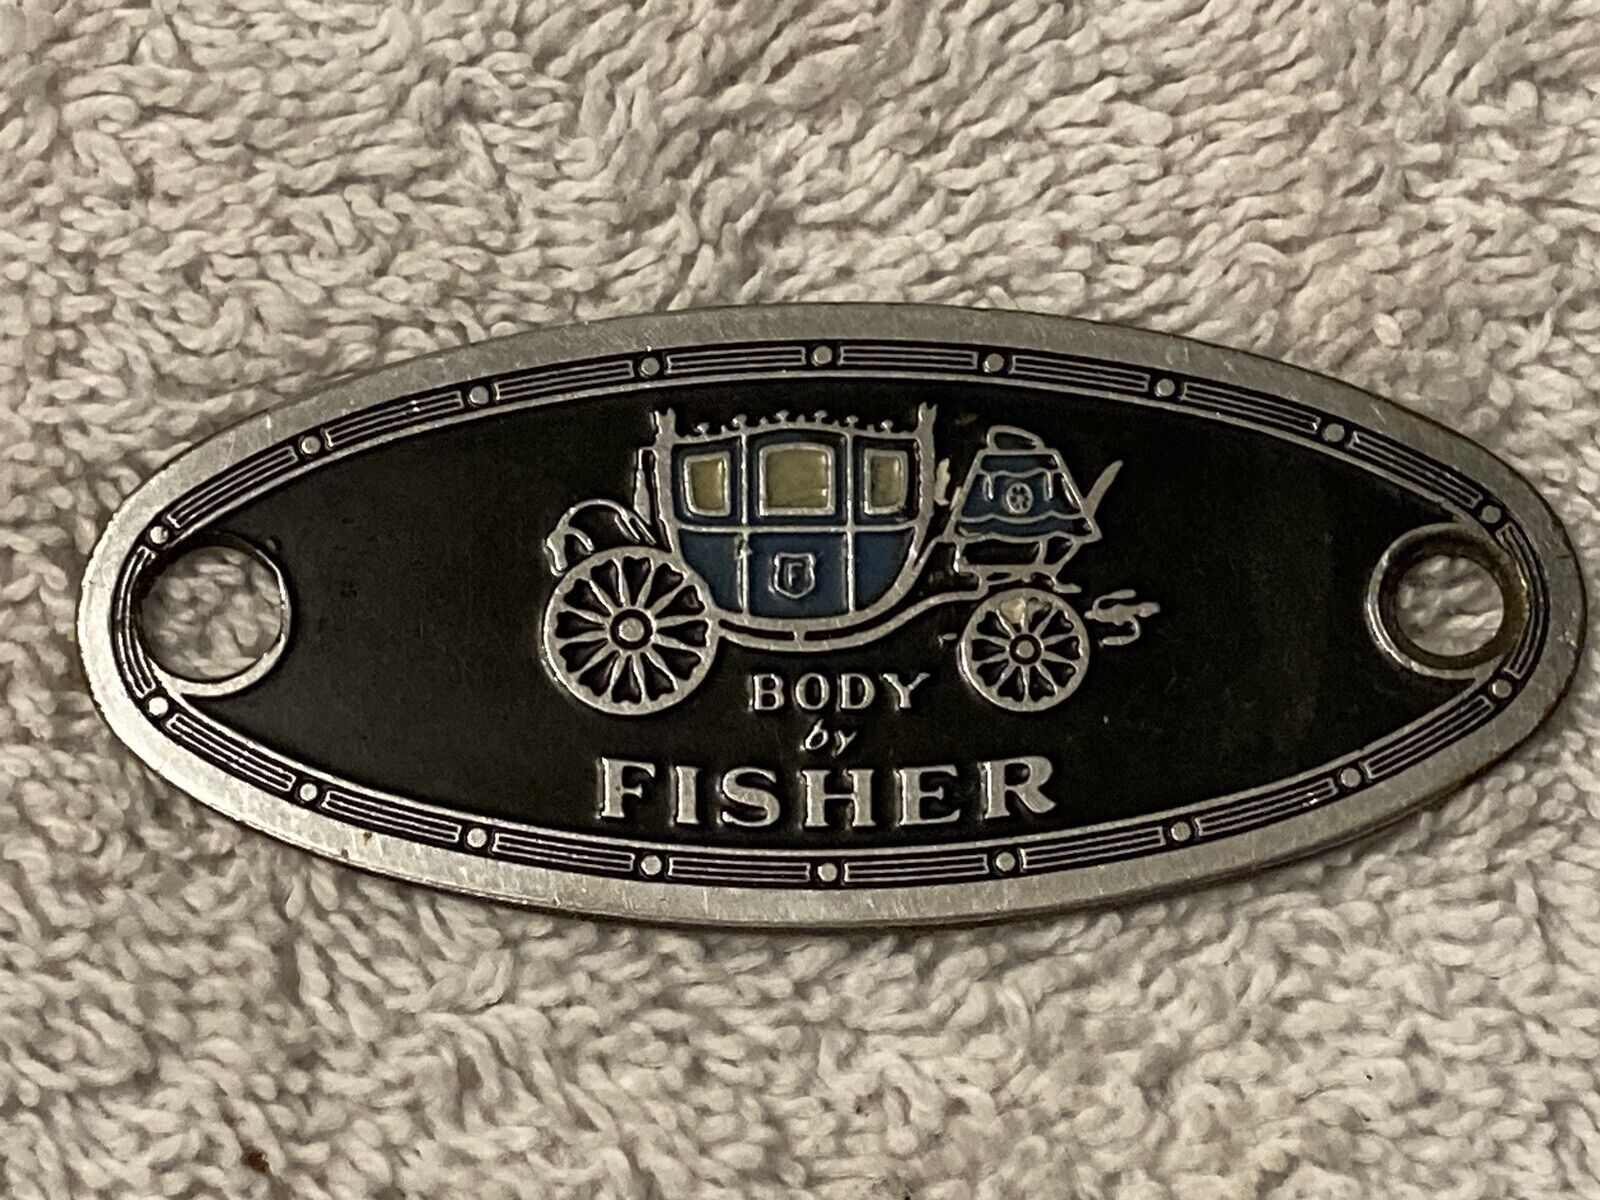 Vintage c.1930-50 BODY BY FISHER Body Tag ID General Motors GM Coachmaker Badge